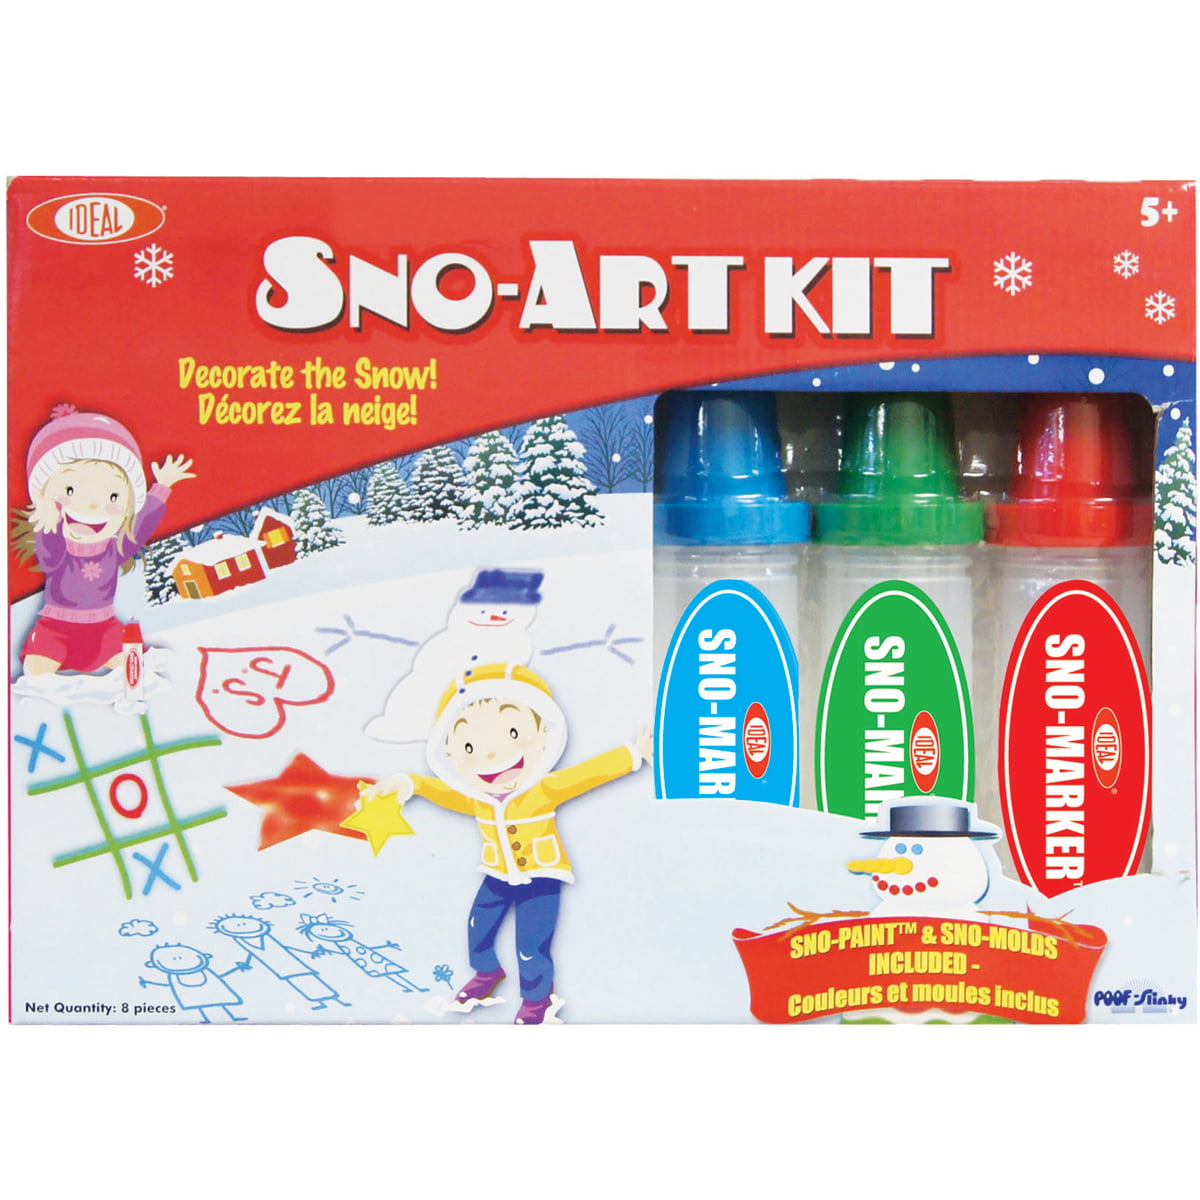 New Sno-Ultimate Deluxe Snow Art Set by Ideal that Glows in the Dark 